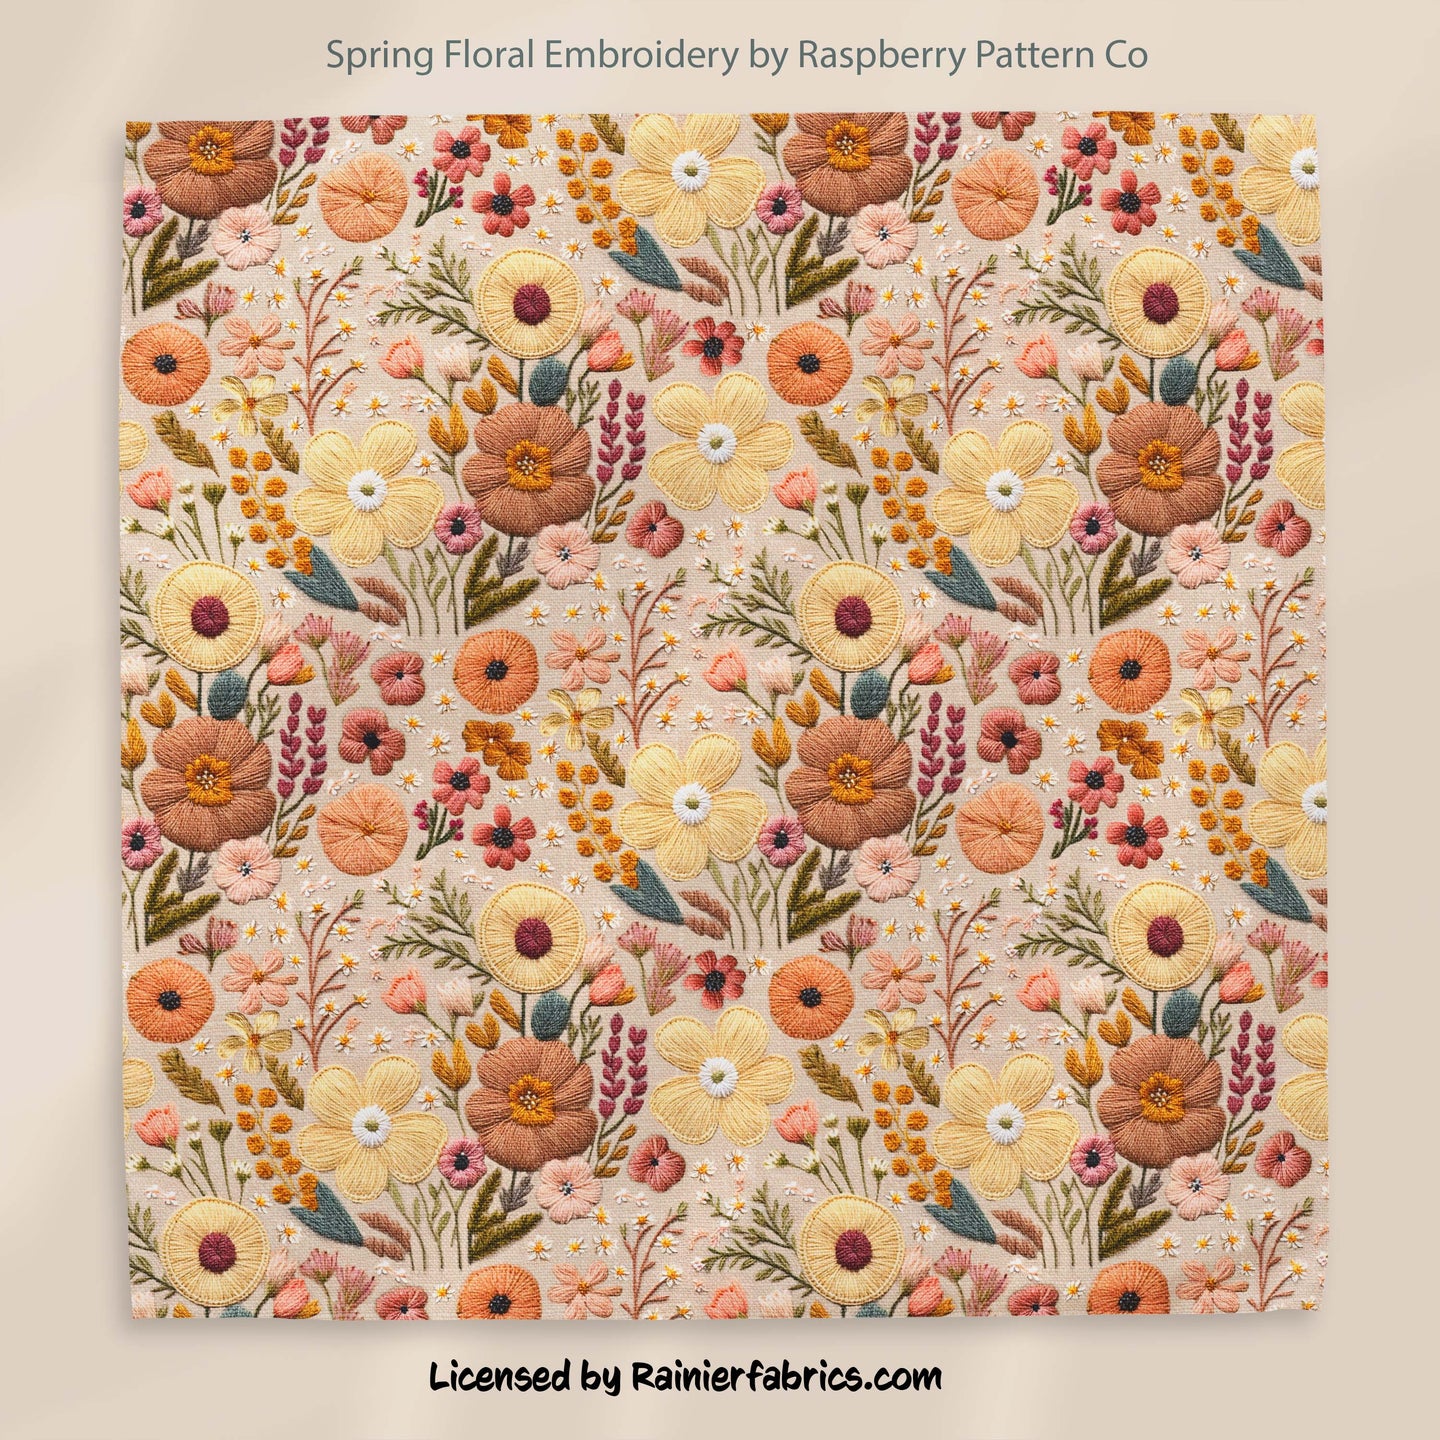 Spring Floral Embroidery by Raspberry Pattern Co - 2-5 business days to ship - Order by 1/2 yard